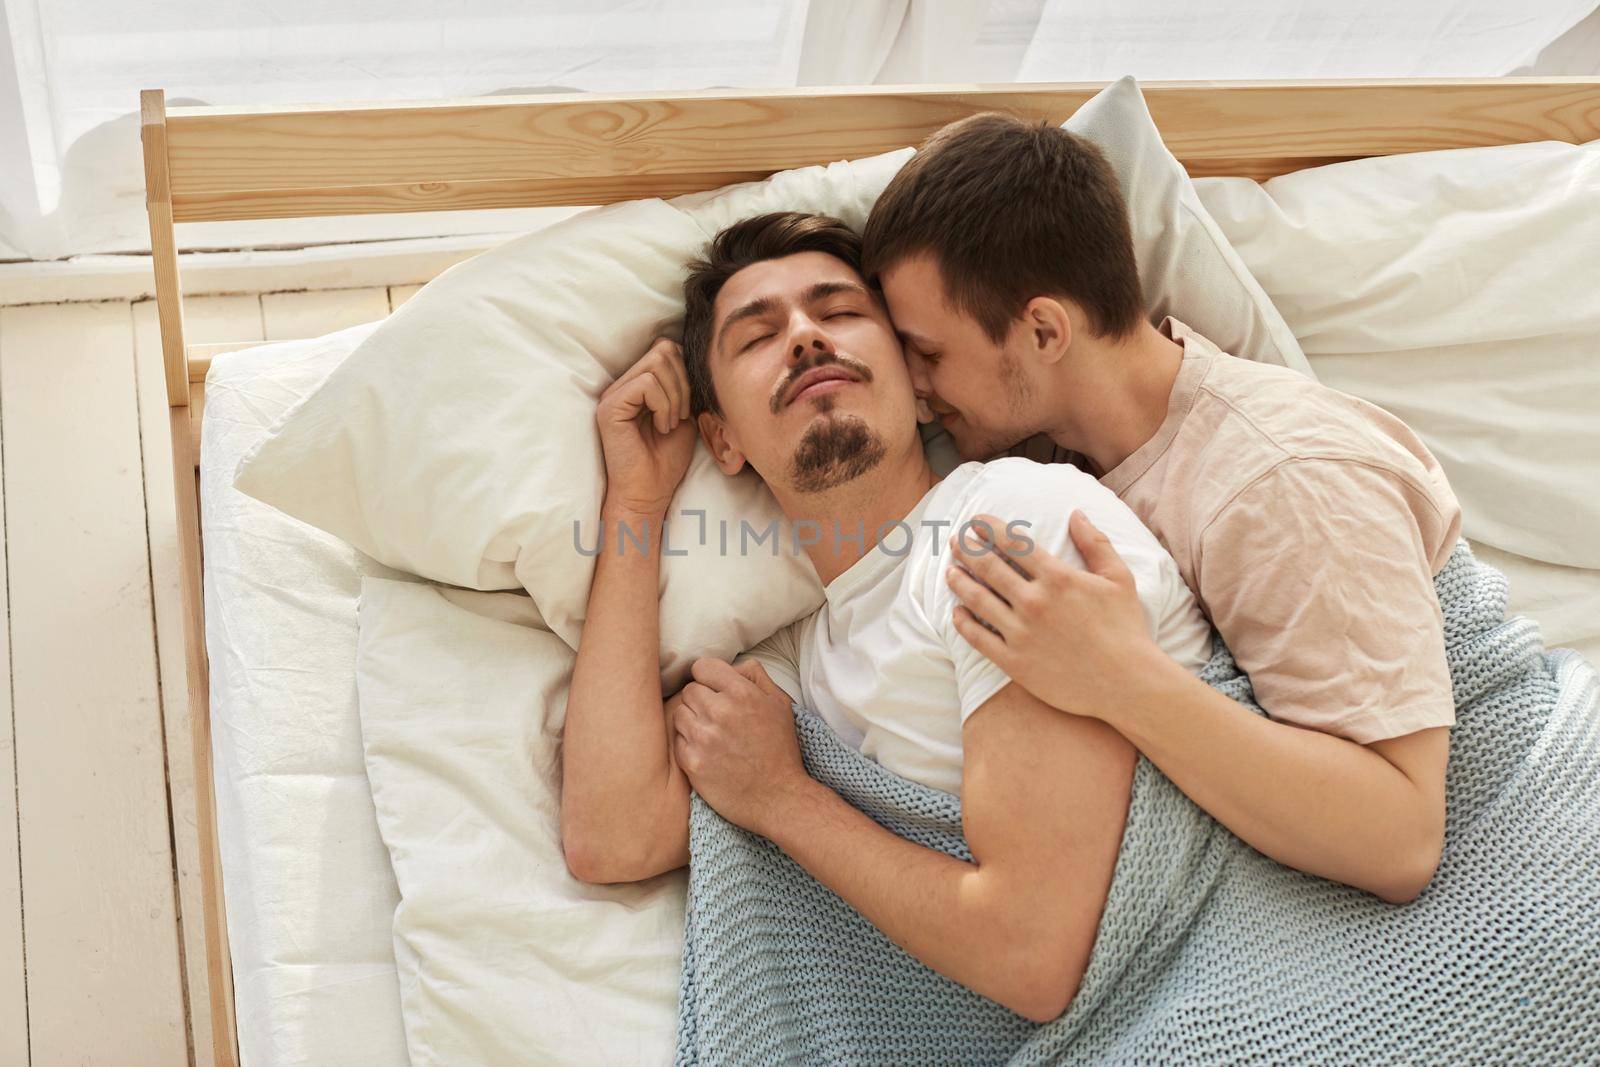 Happy gay couple lying on bed at home top view